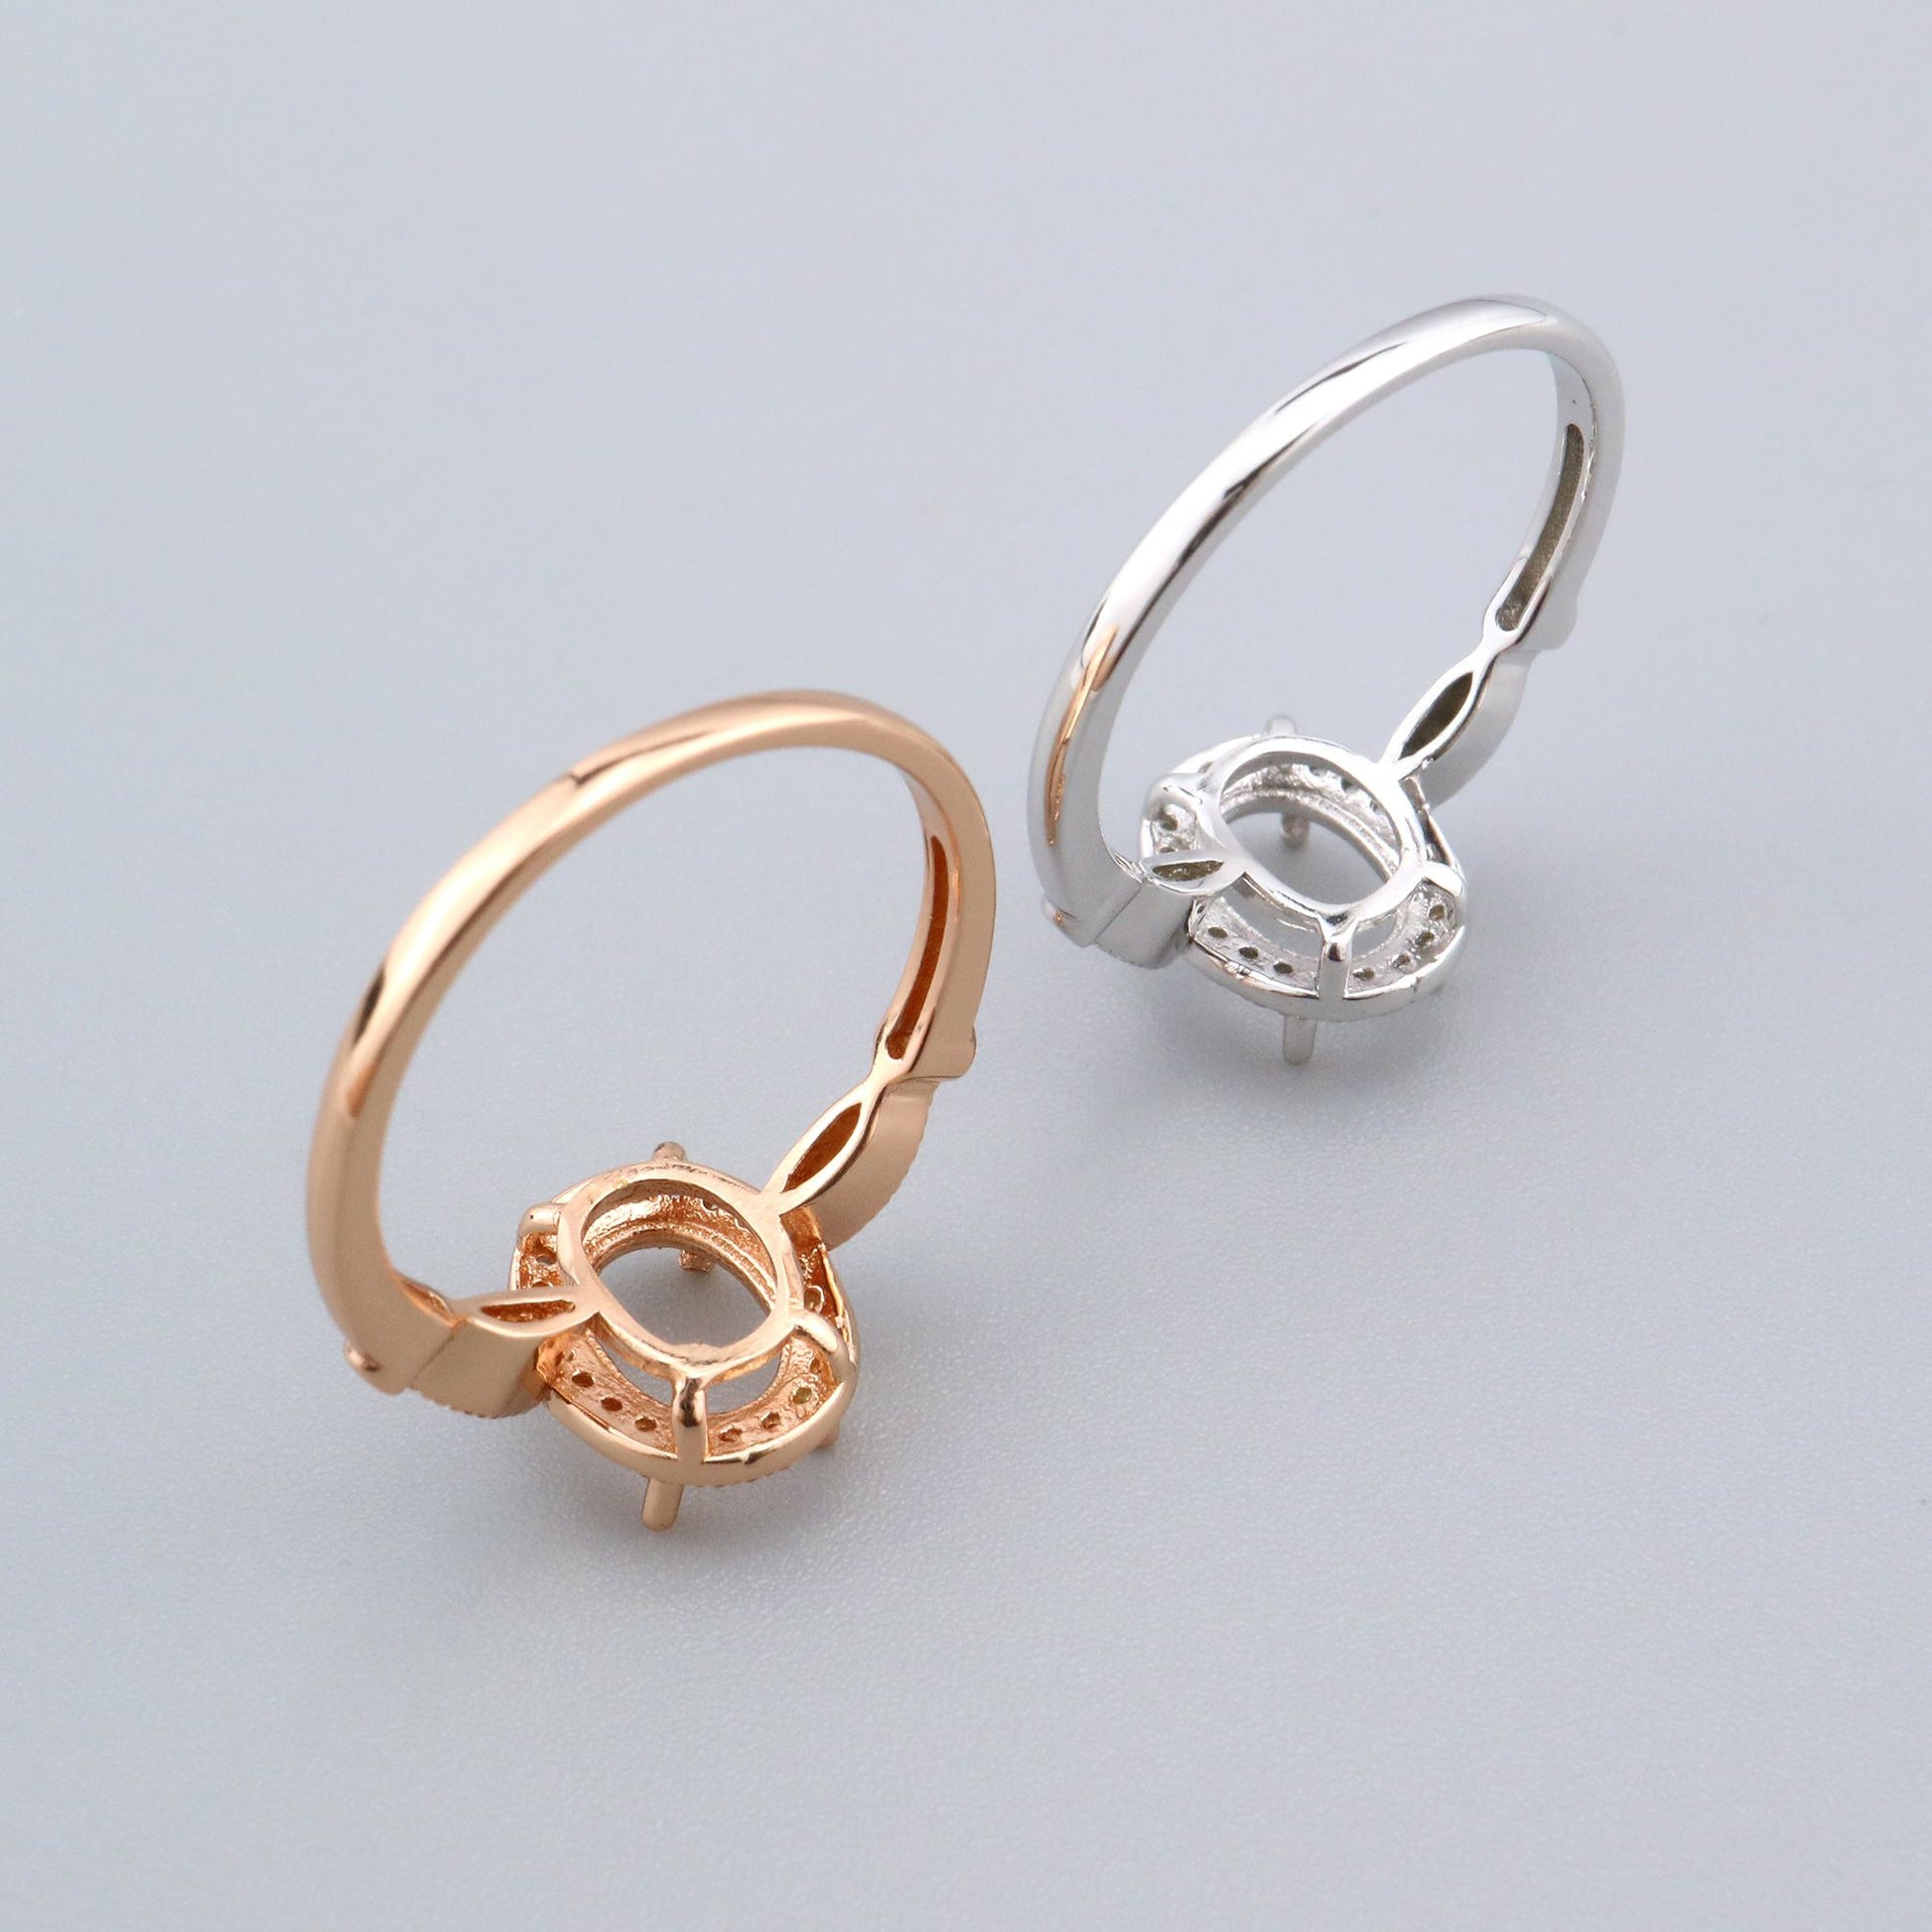 One silver and one rose gold vintage style oval semi mount.